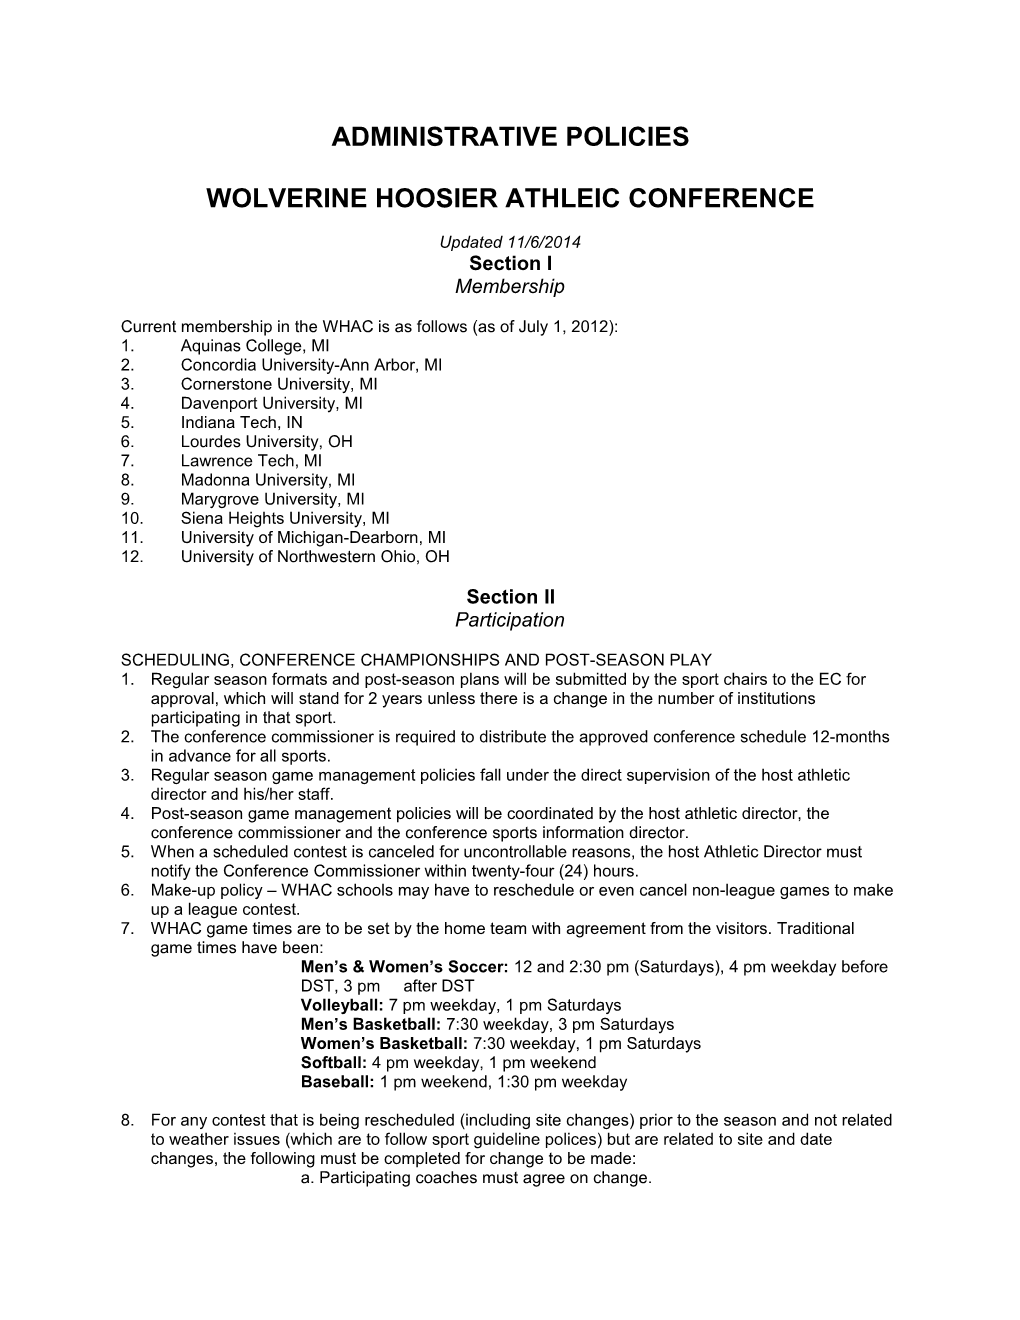 Wolverine Hoosier Athleic Conference